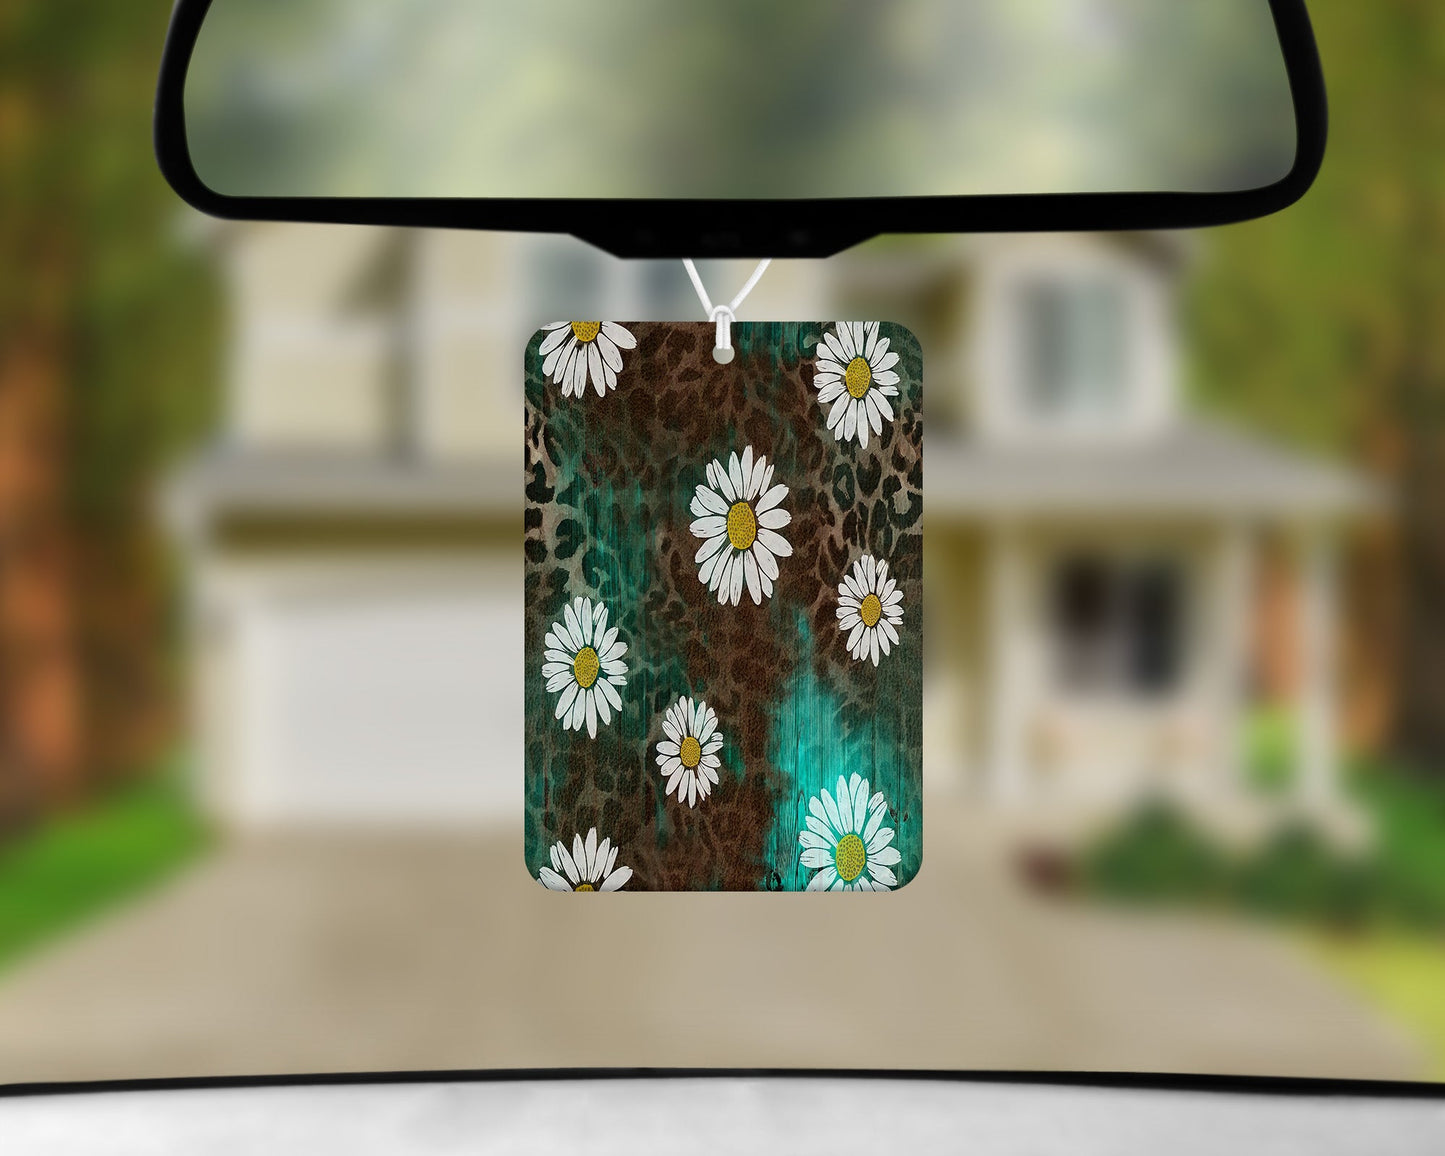 Western Daisies |Freshie|Includes Scent Bottle - Vehicle Air Freshener